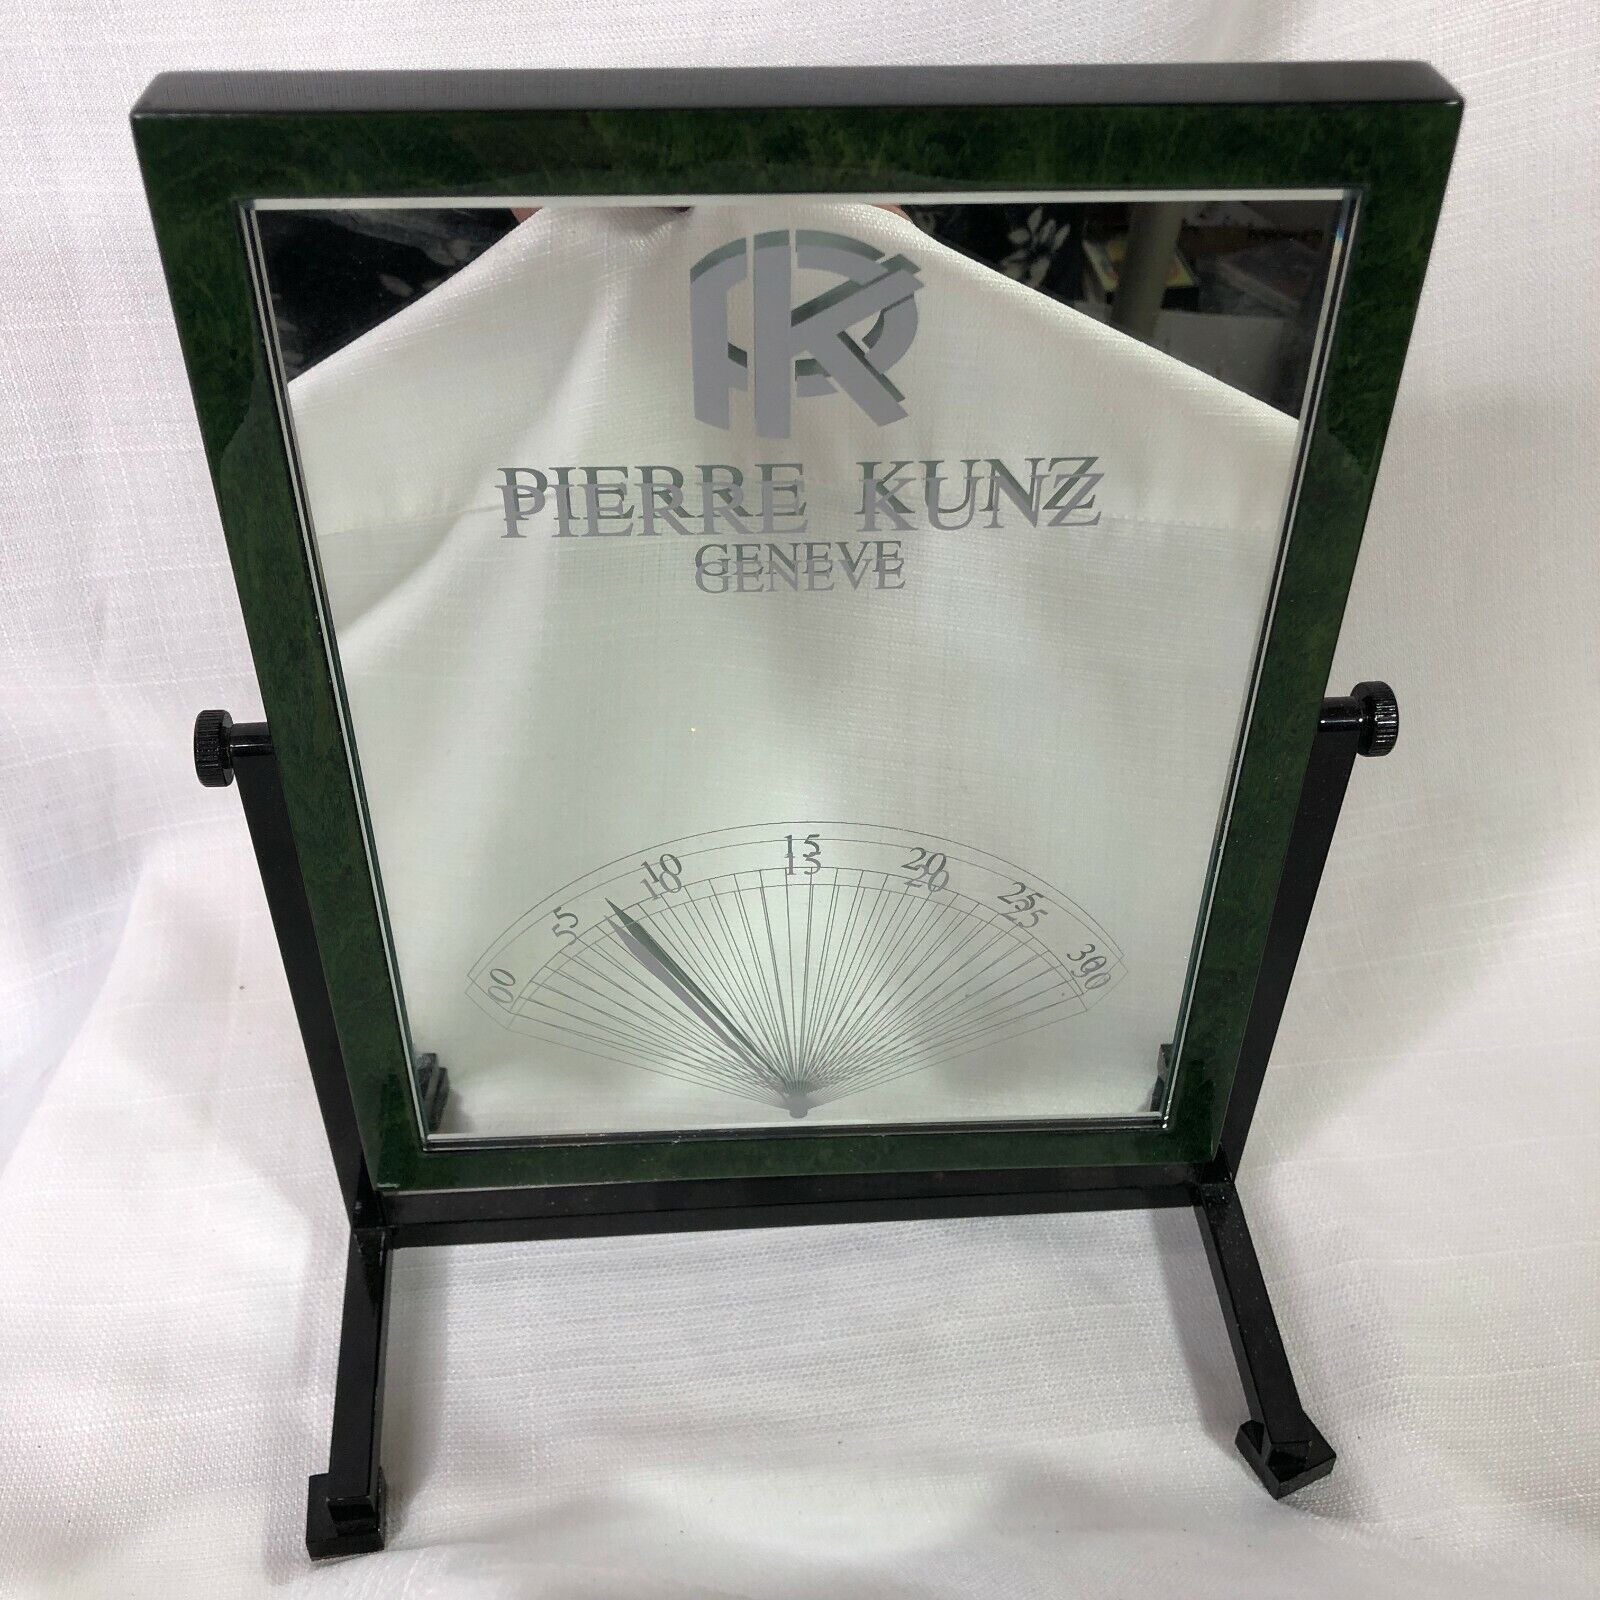 Pierre Kunz Rare Mirror Watch 3D Display Promotional Store Geneve Tabletop Time 